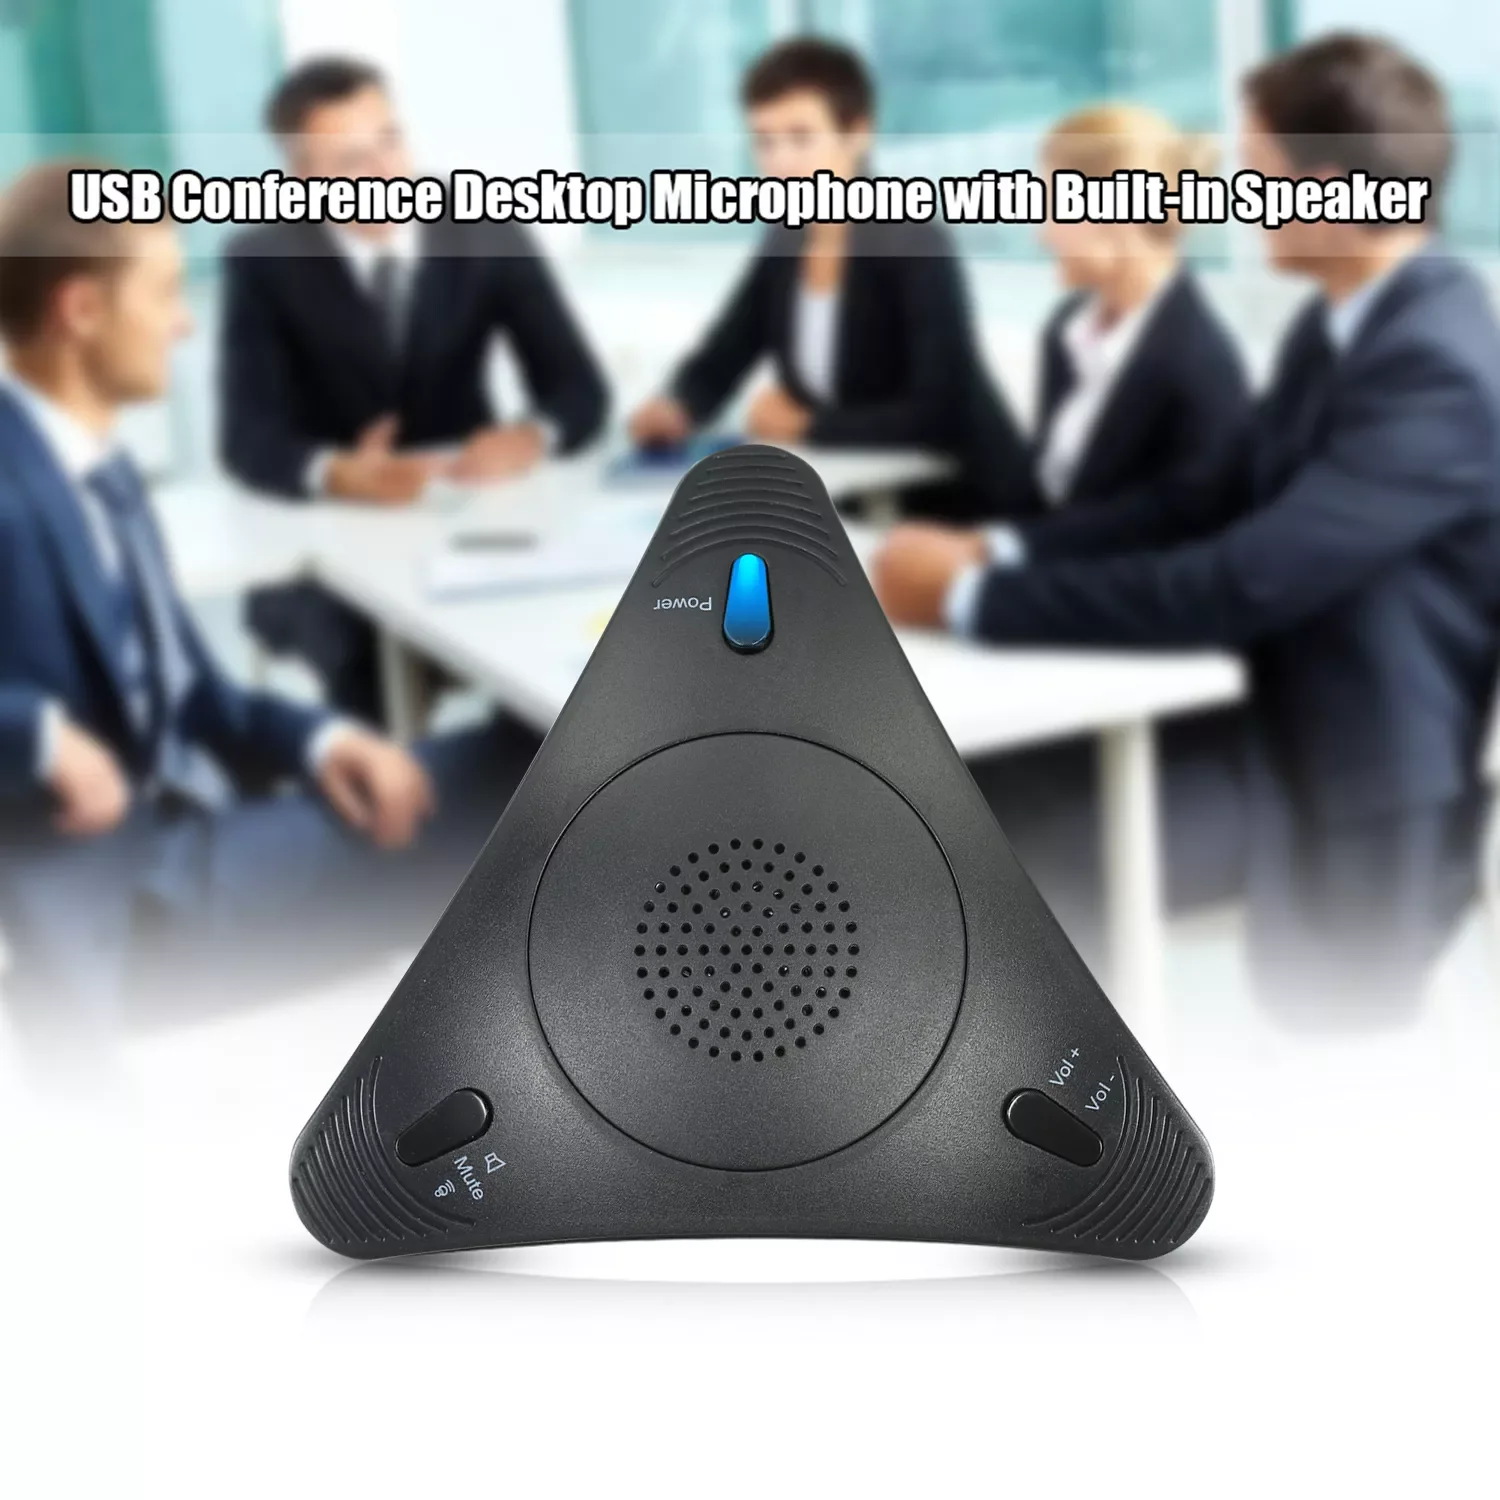 USB Conference Computer Microphone VOIP Omnidirectional Desktop Wired Microphone Built-in Speaker Volume Control Mute Function enlarge